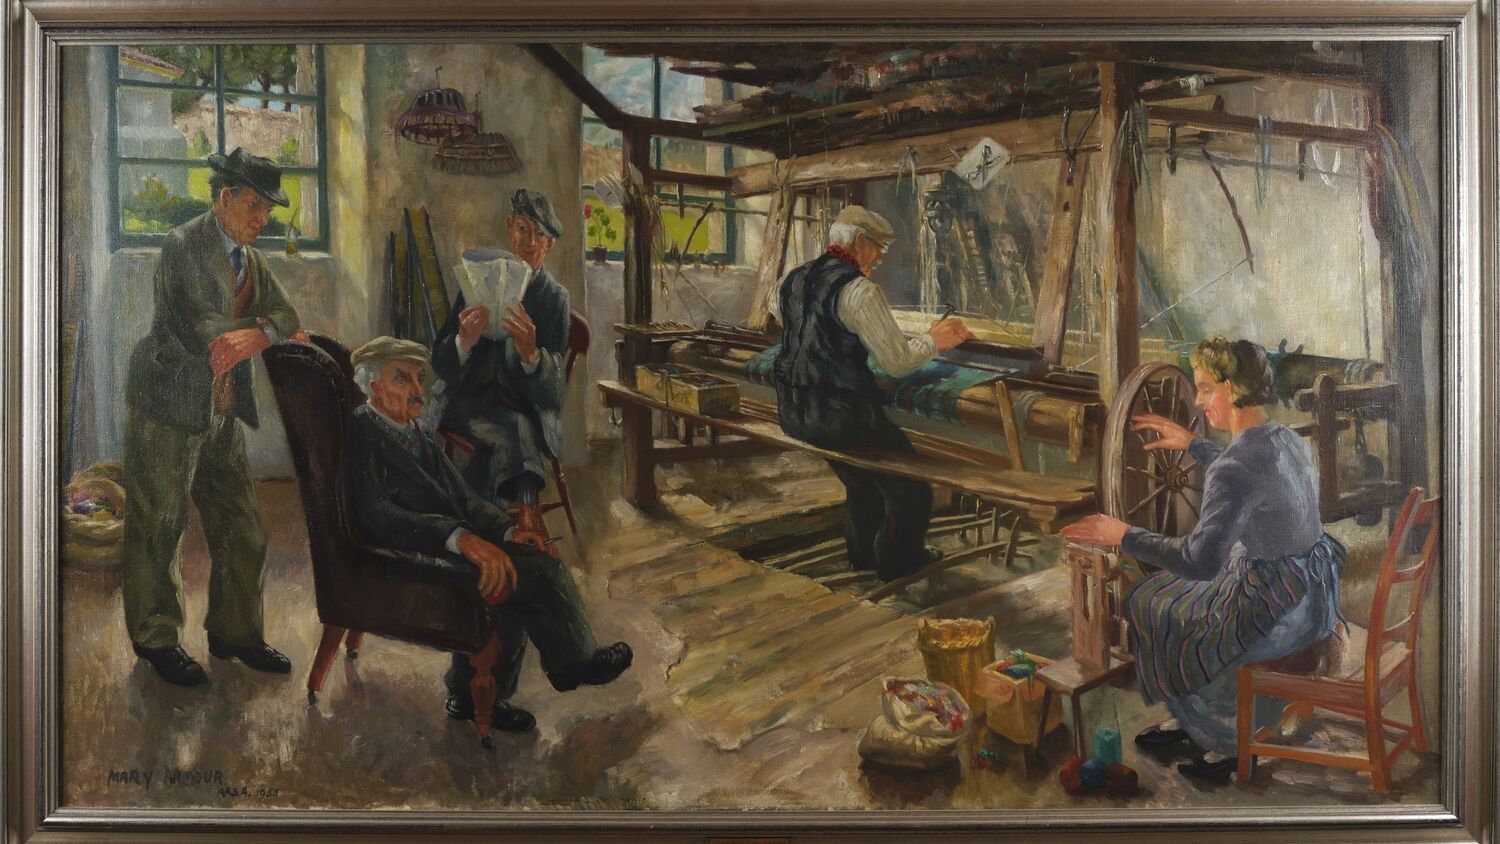 An oil painting of a group of people in a weaving workshop. An old man sits at the wooden loom, adjusting the threads. A woman sits nearby, at a spinning wheel. A group of three men gather at the other side of the room: one reads the paper, one sits on a chair looking at the loom, and the other leans against the back of the chair.